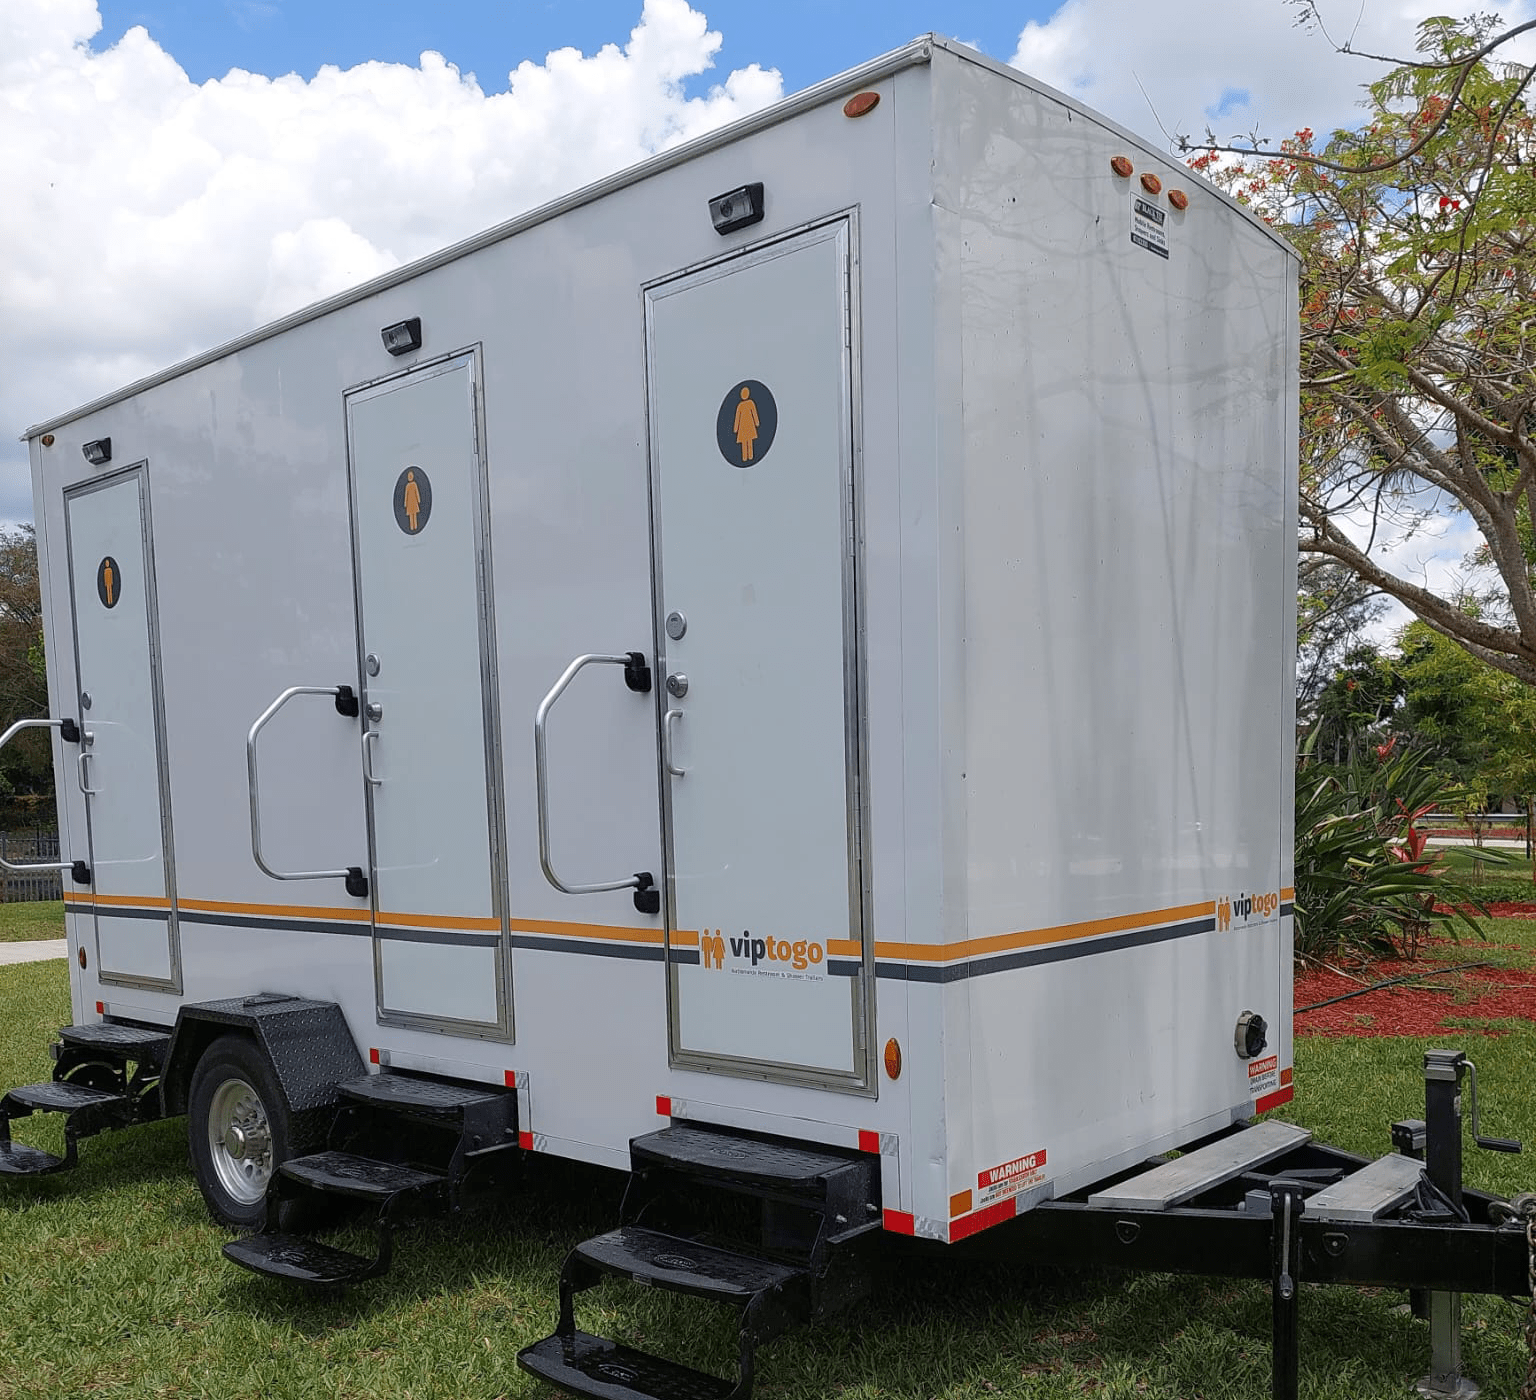 VIP To Go’s portable restrooms for disaster relief